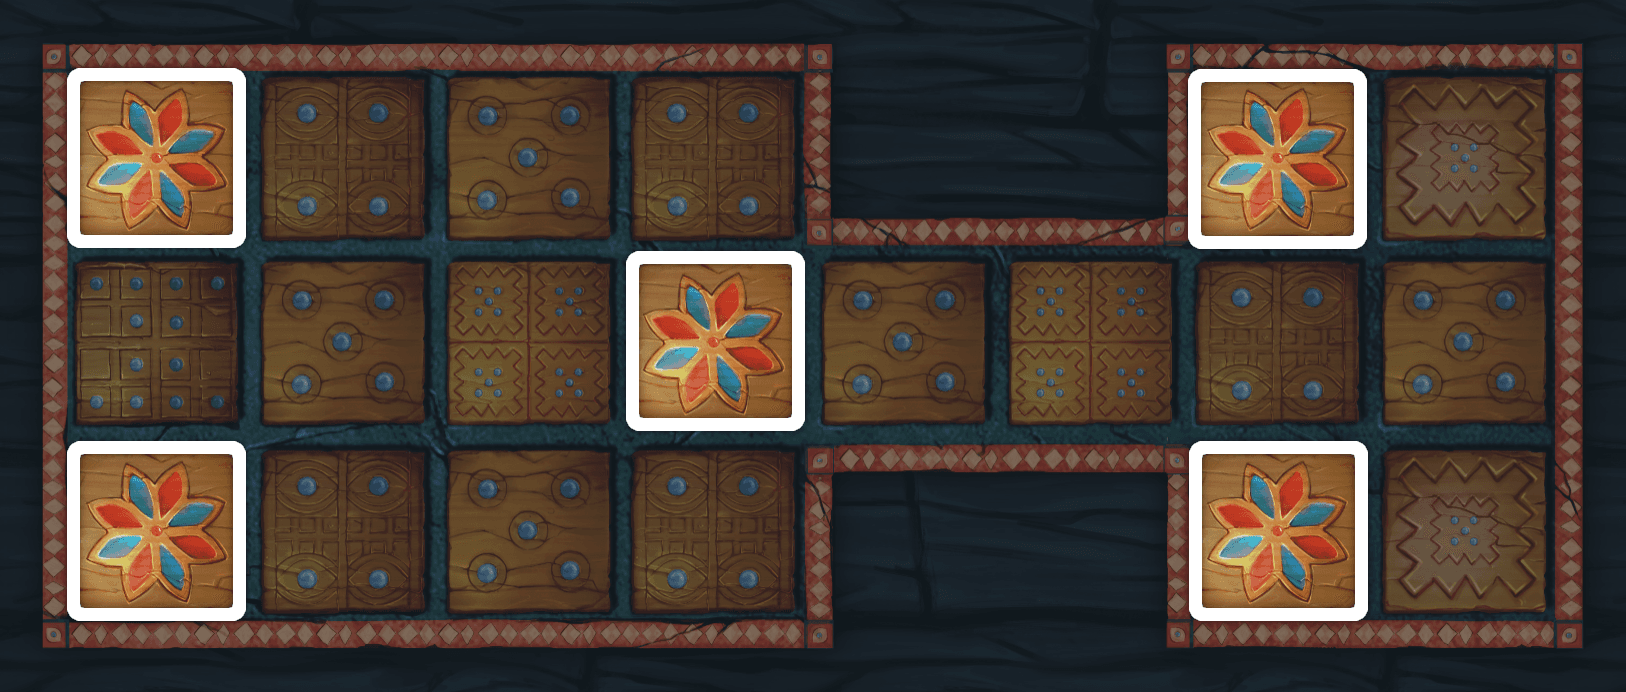 A photo of a game board with the rosette tiles highlighted.